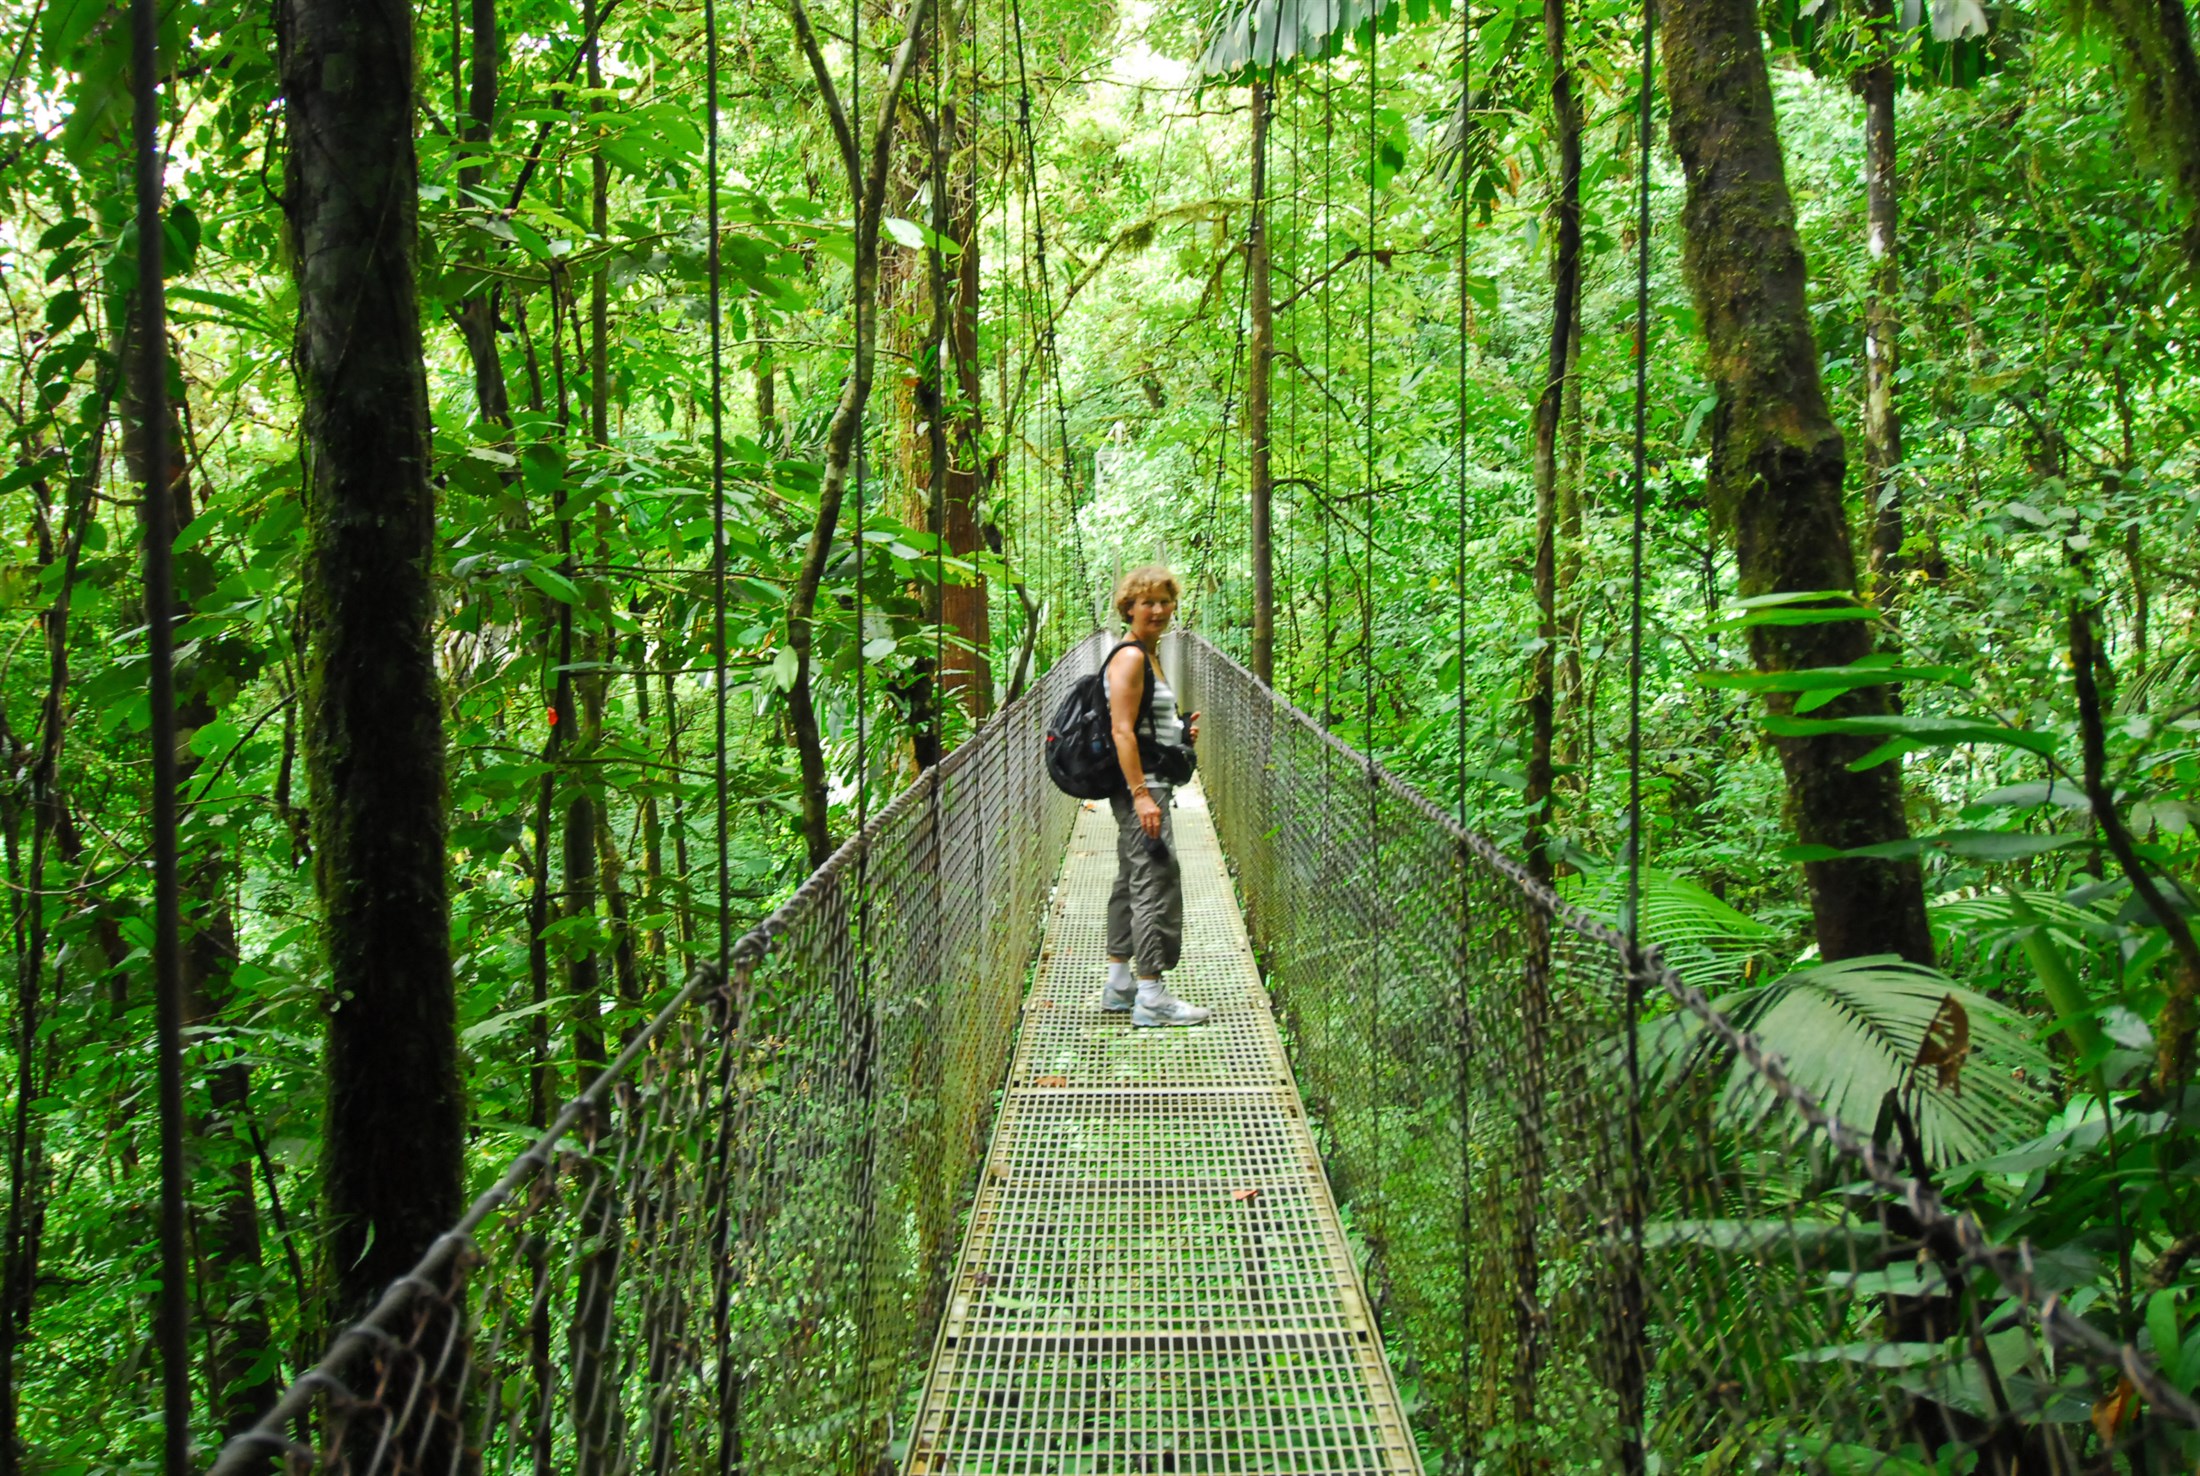 costa-rica-linking-tourism-conservation_e576-2200x1476px